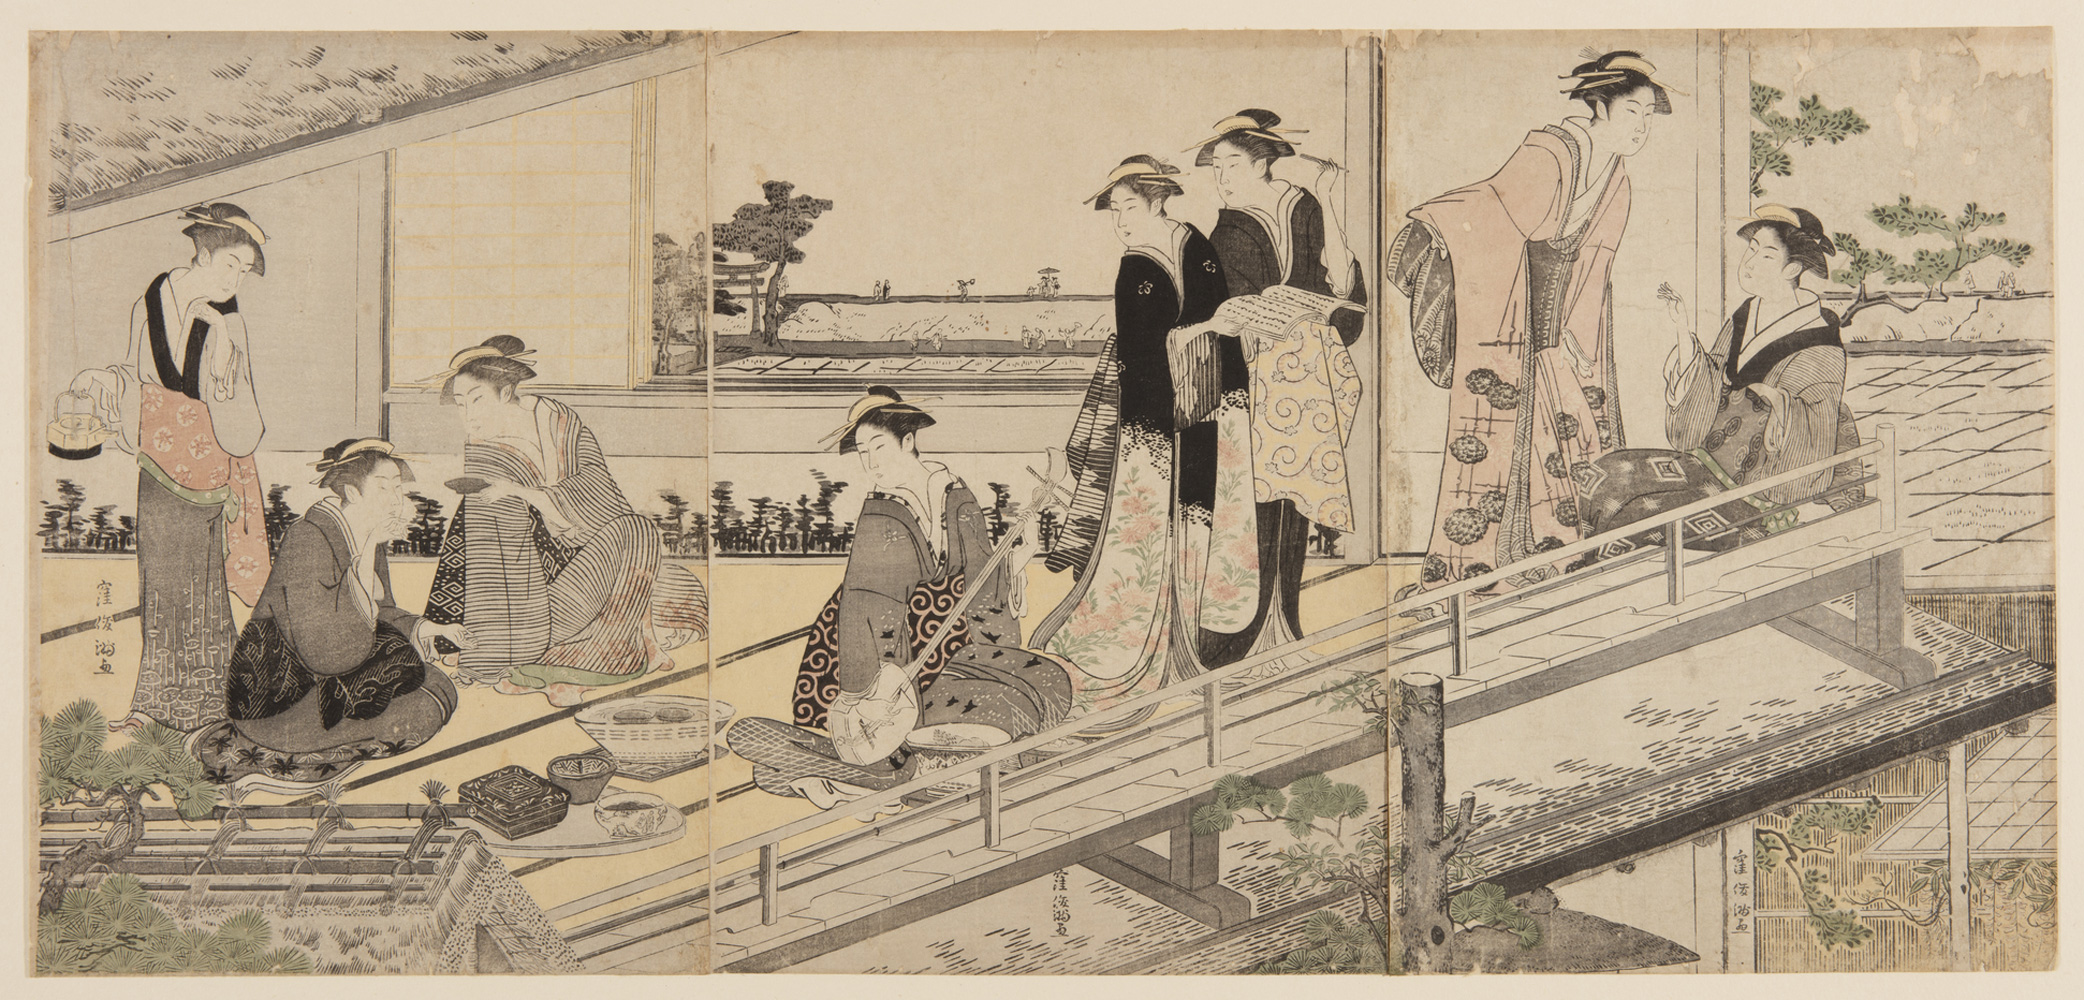 Japanese print of a group of women in traditional clothes in an upstairs room overlooking a garden. On the left two women are seated and drinking tea, next to them a woman looks down holding a teapot. In the centre a woman is kneeling playing a musical instrument, two women turn and look at her. On the right a woman is seated and a woman bends to talk to her.